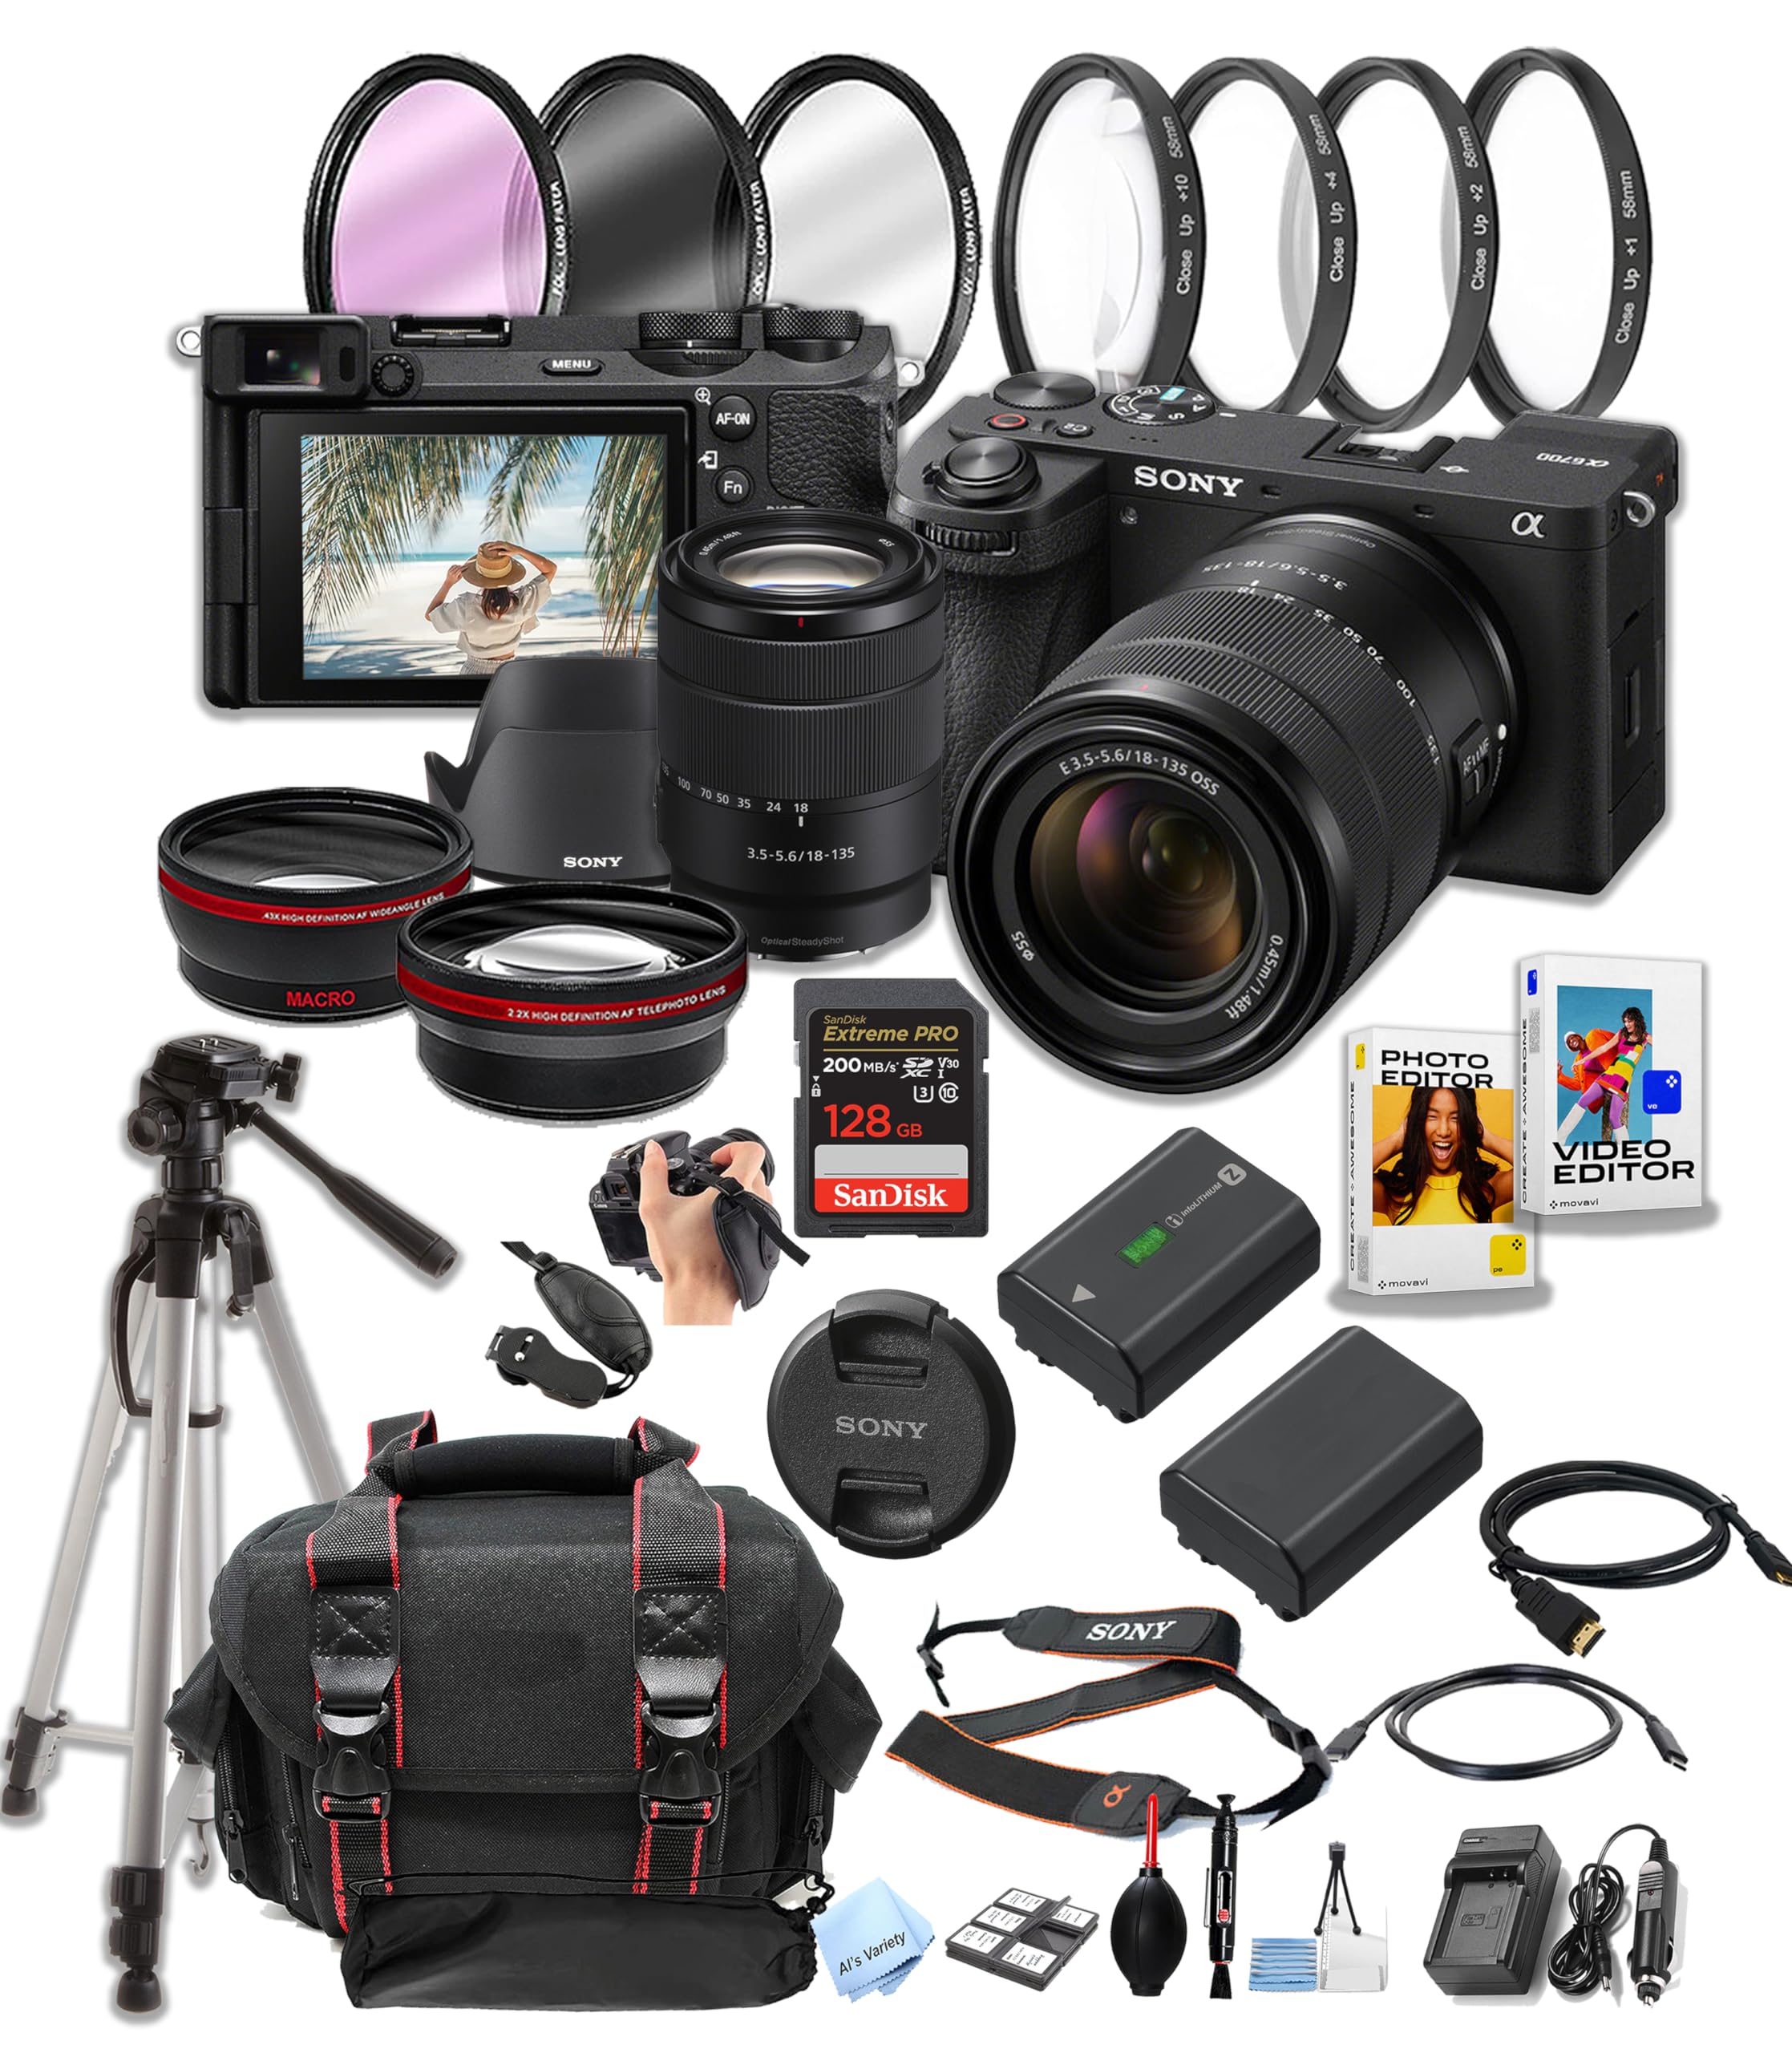 Sony a6700 Mirrorless Camera with 18-135mm Lens + 128GB Pro Speed Memory + Case + Tripod + Software Pack -Proffesional Photo Bundle (Renewed)